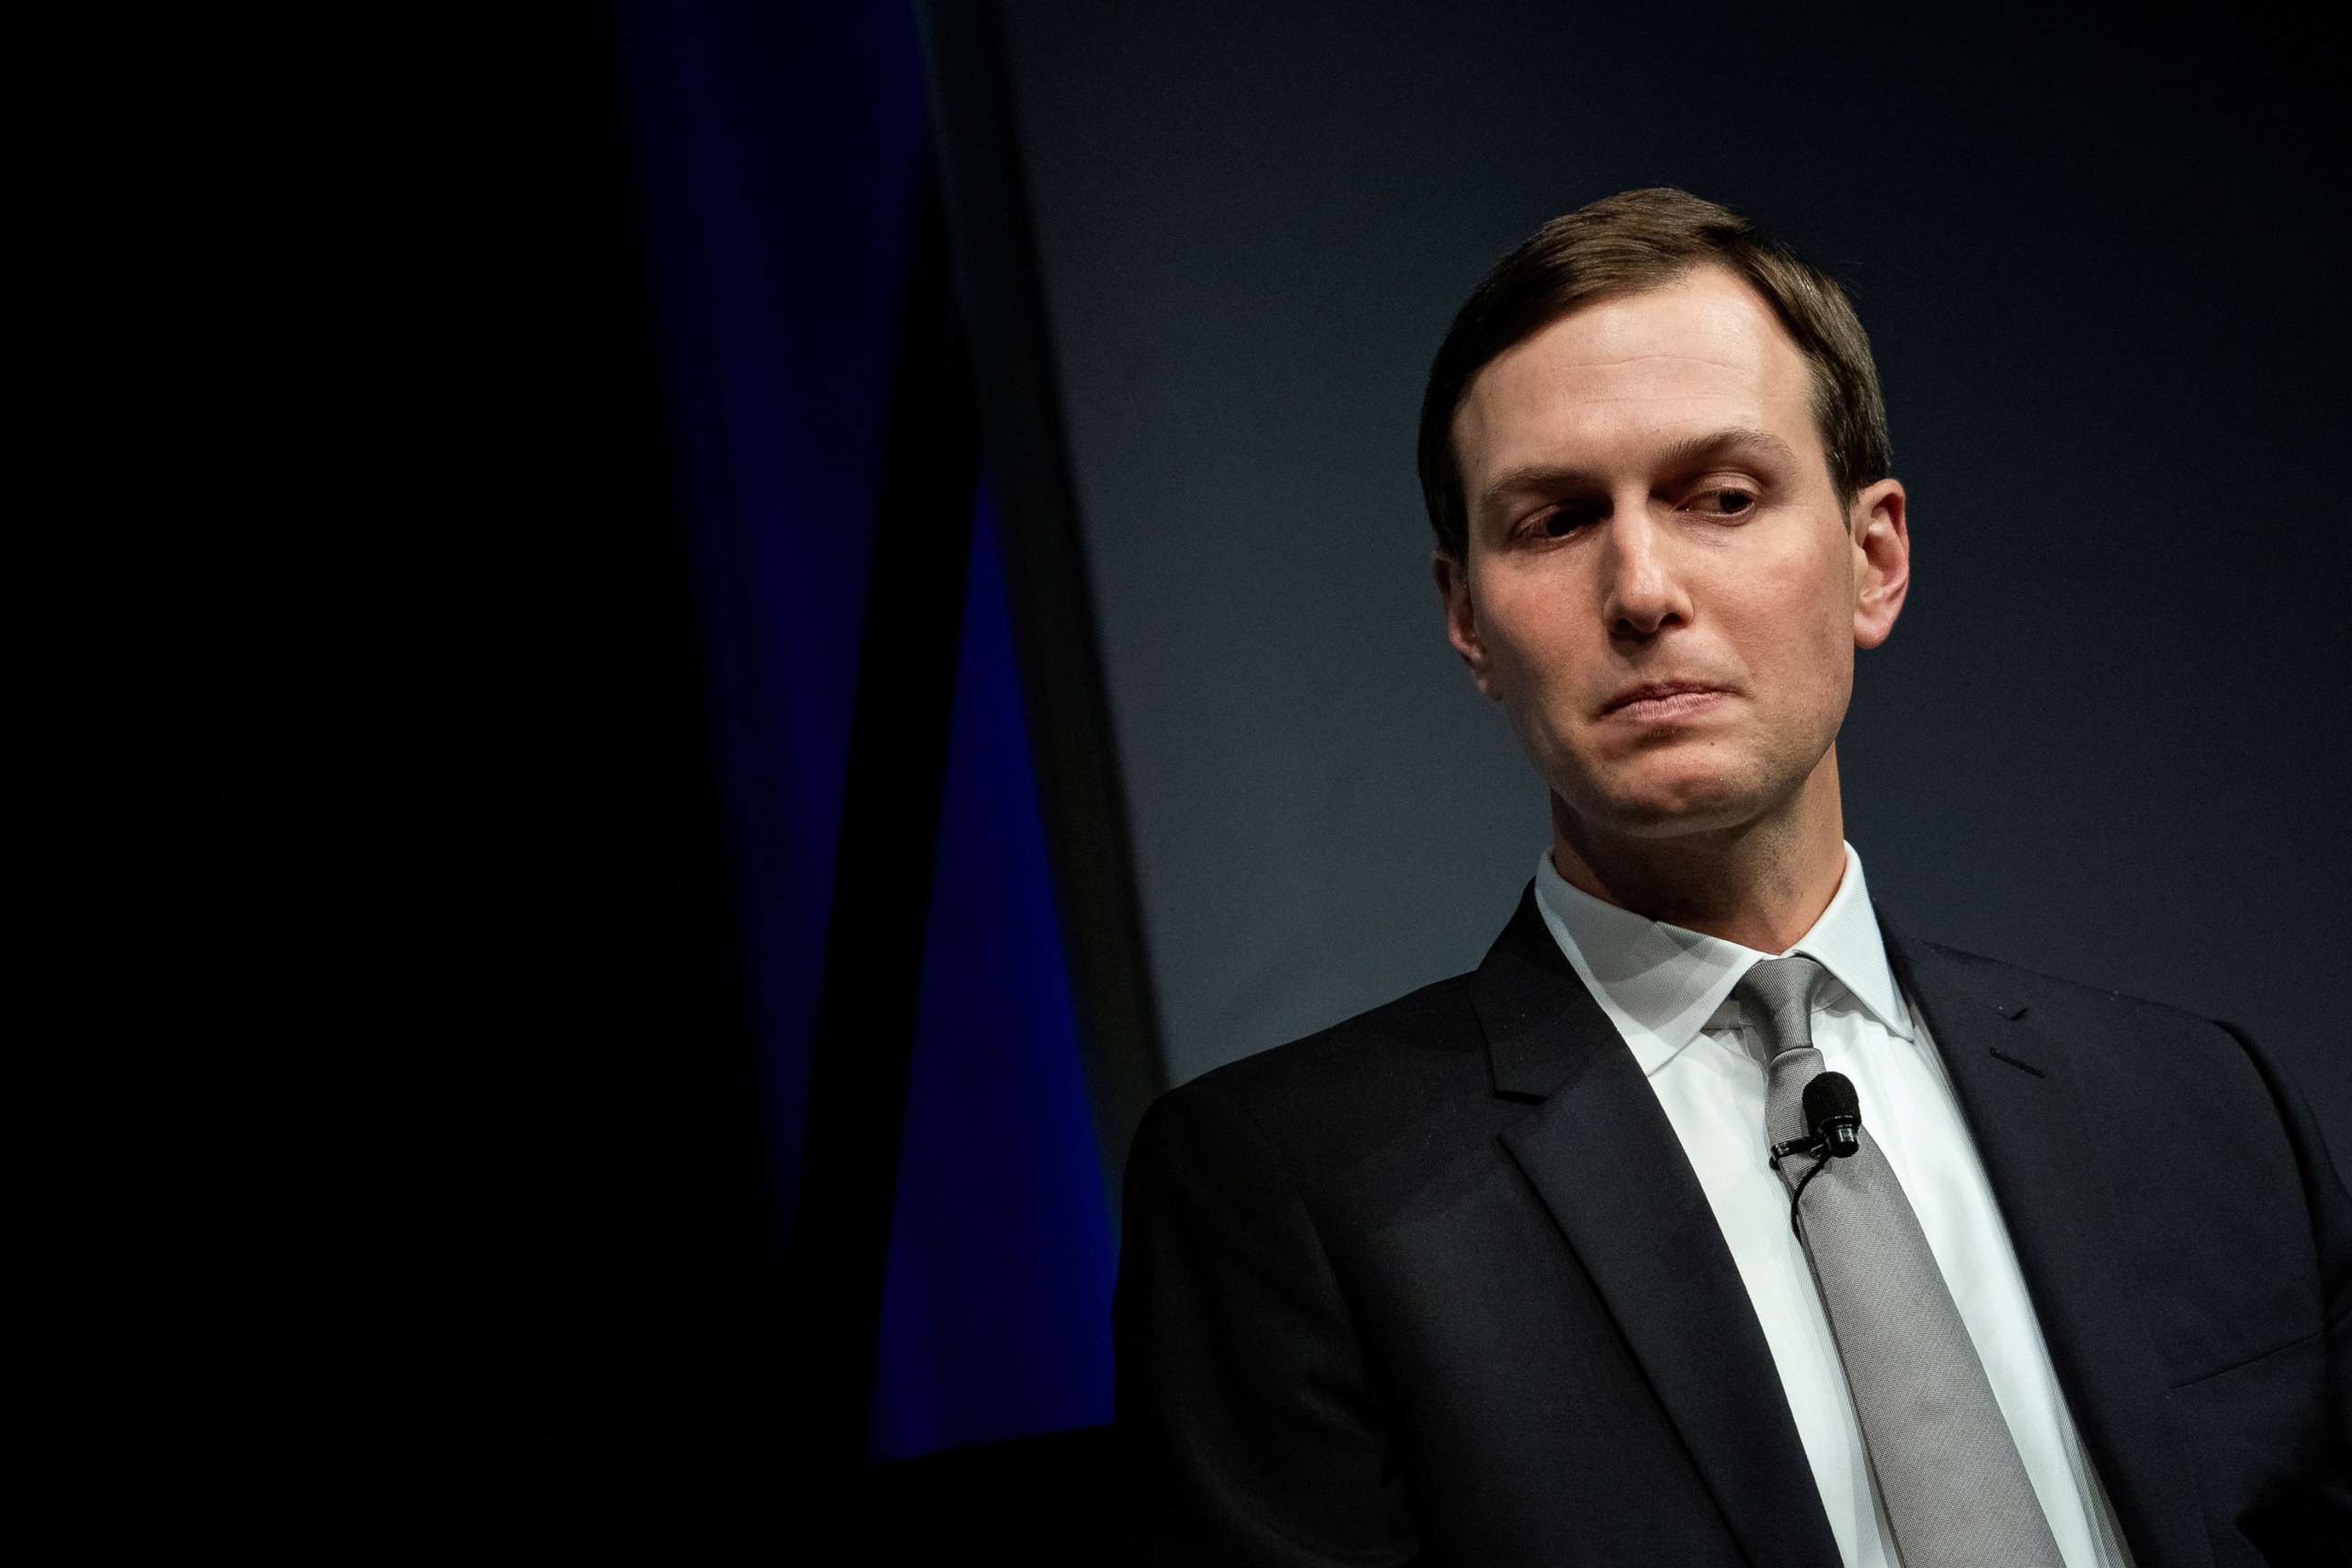 PHOTO: Jared Kushner listens during the Wall Street Journal CEO Council, at the Newseum in Washington, Dec. 9, 2019.